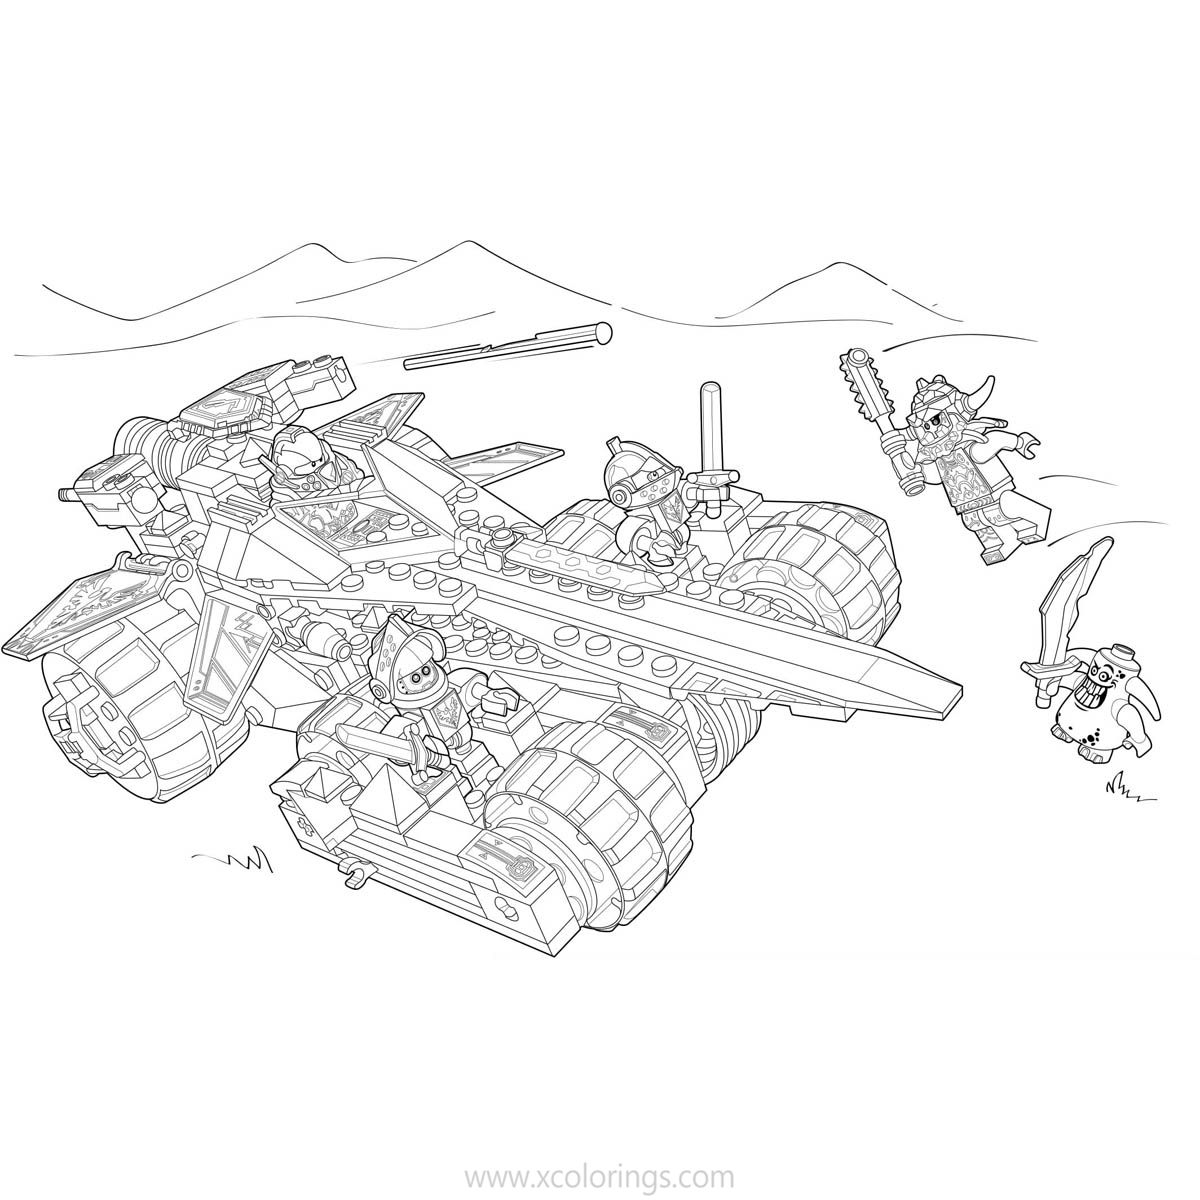 Free LEGO NEXO Knights Coloring Pages - XColorings.com